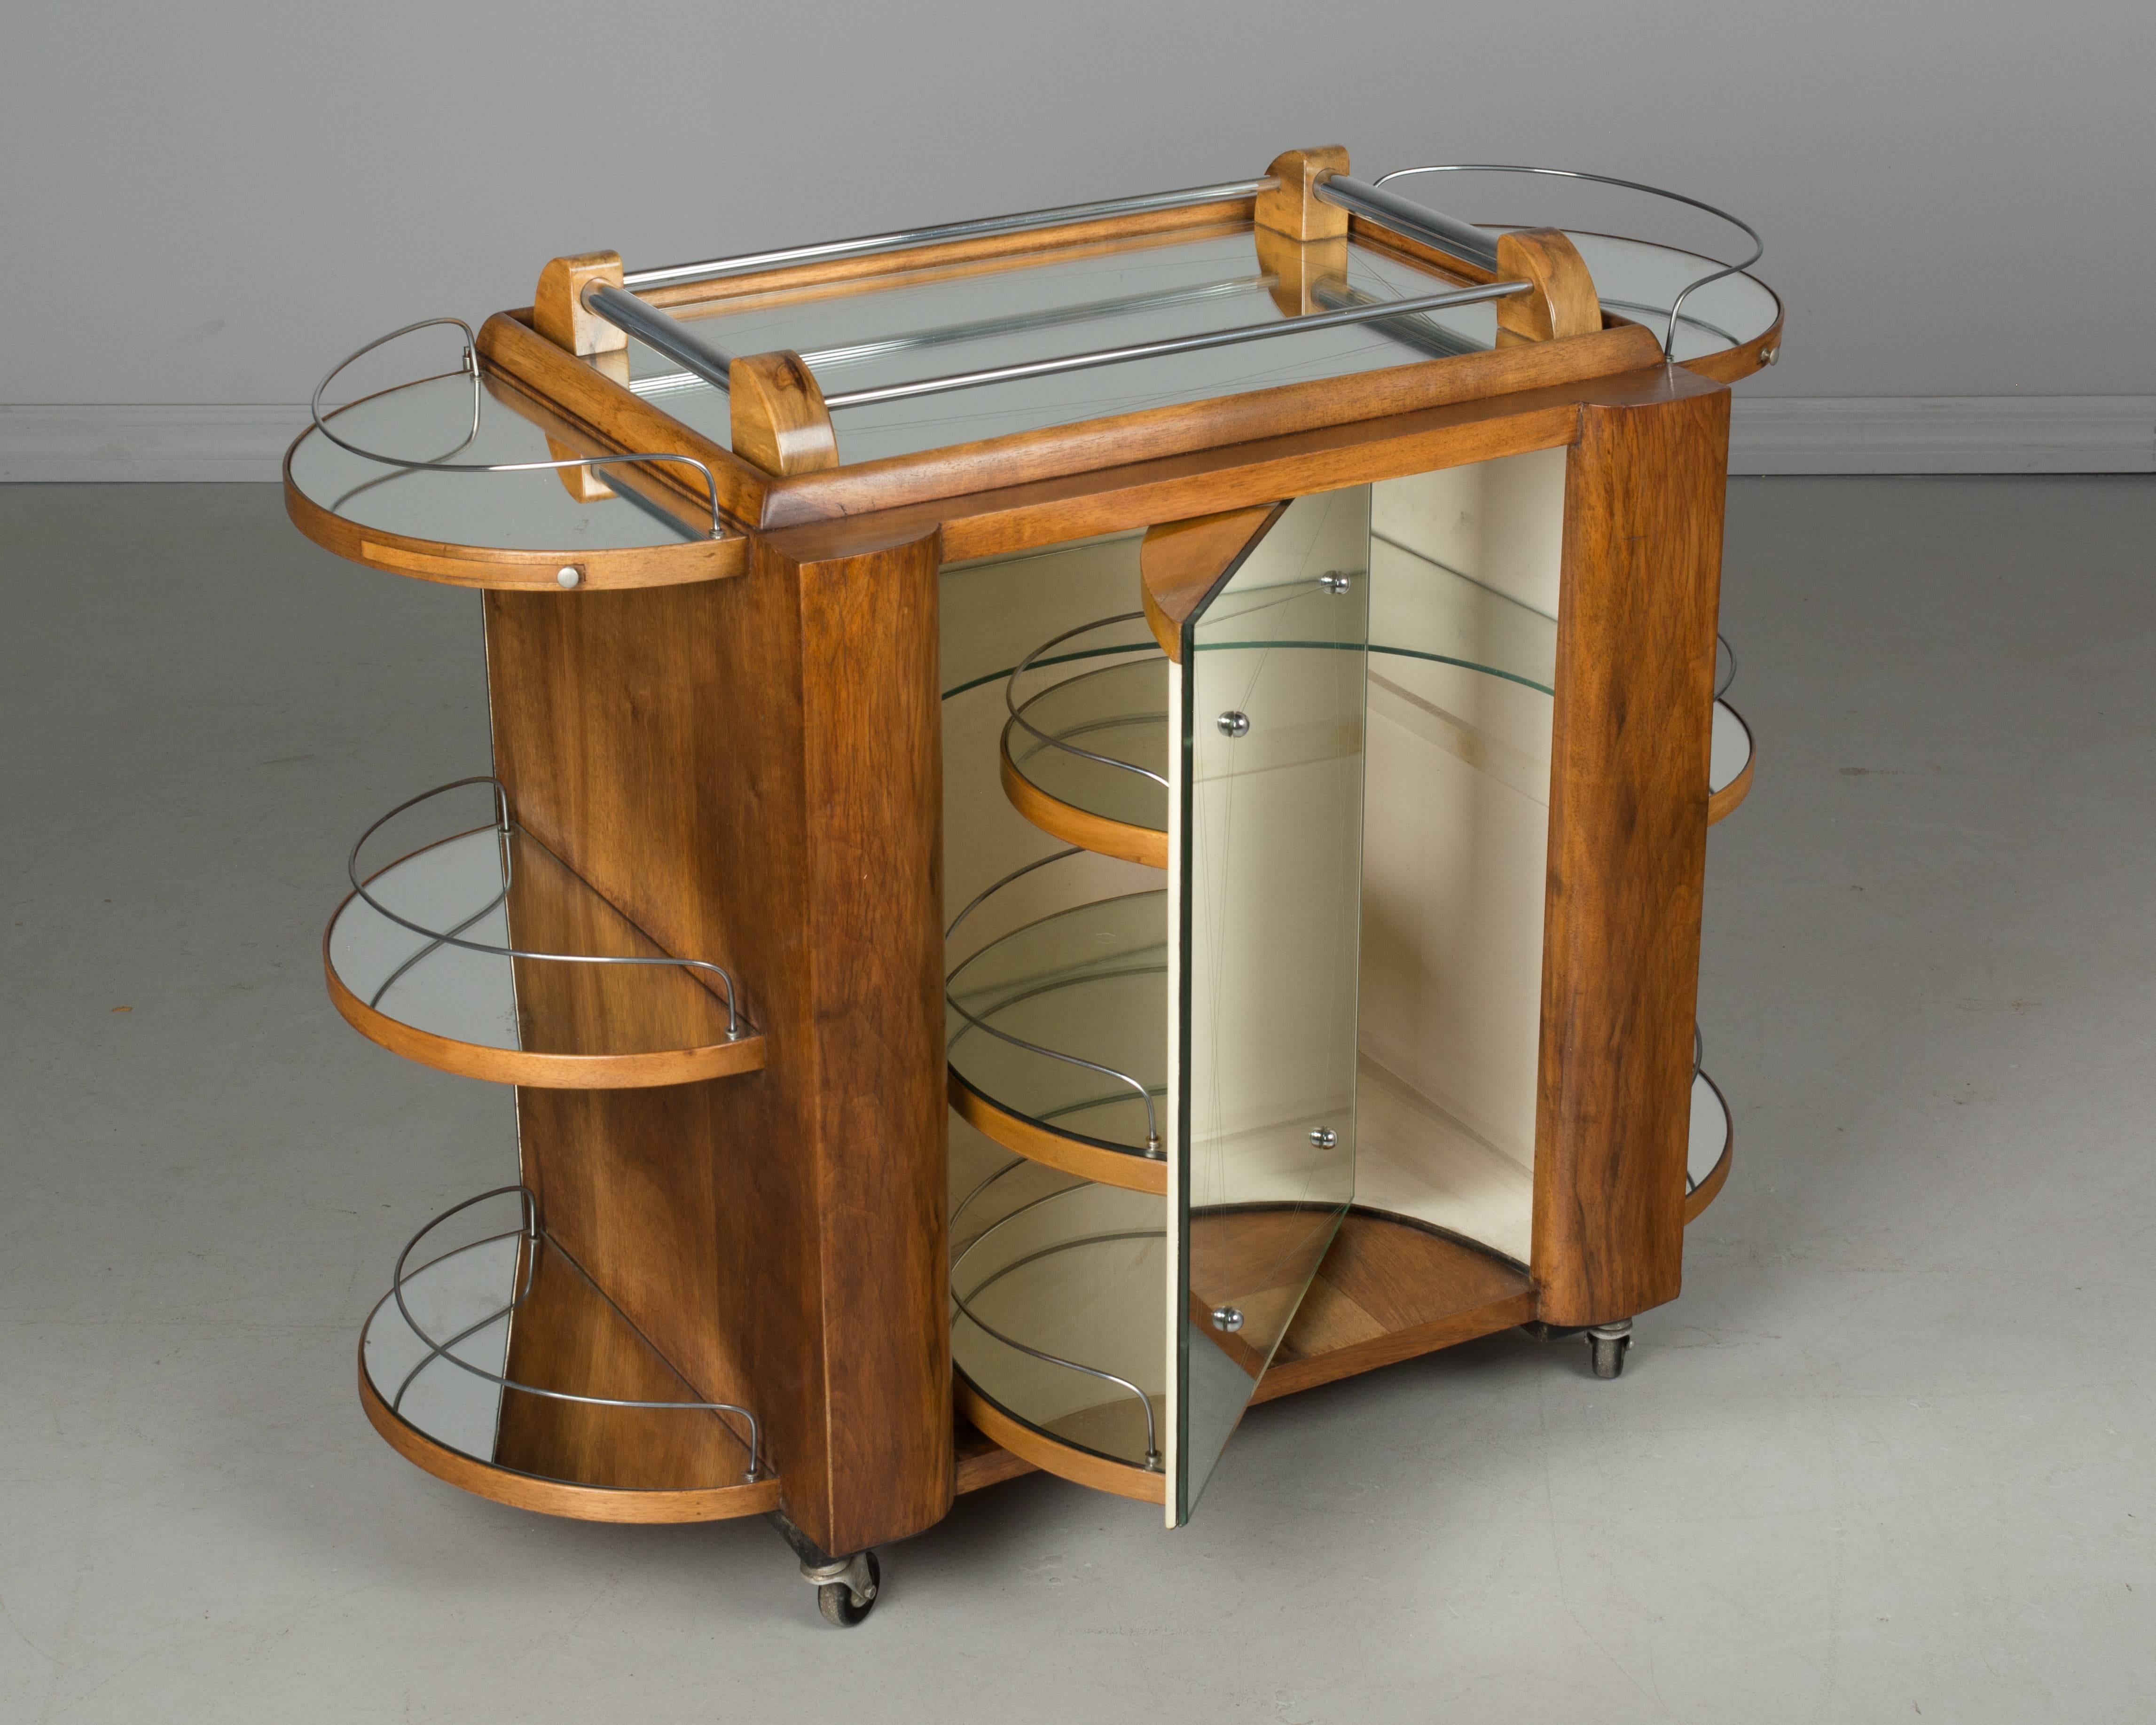 A French Art Deco style mirrored rolling bar cabinet by Bar Tugas made of veneer of walnut. Classic ocean liner styling includes rounded ends with metal wire railings, simulating a ships deck. The etched mirror front door swings open to reveal